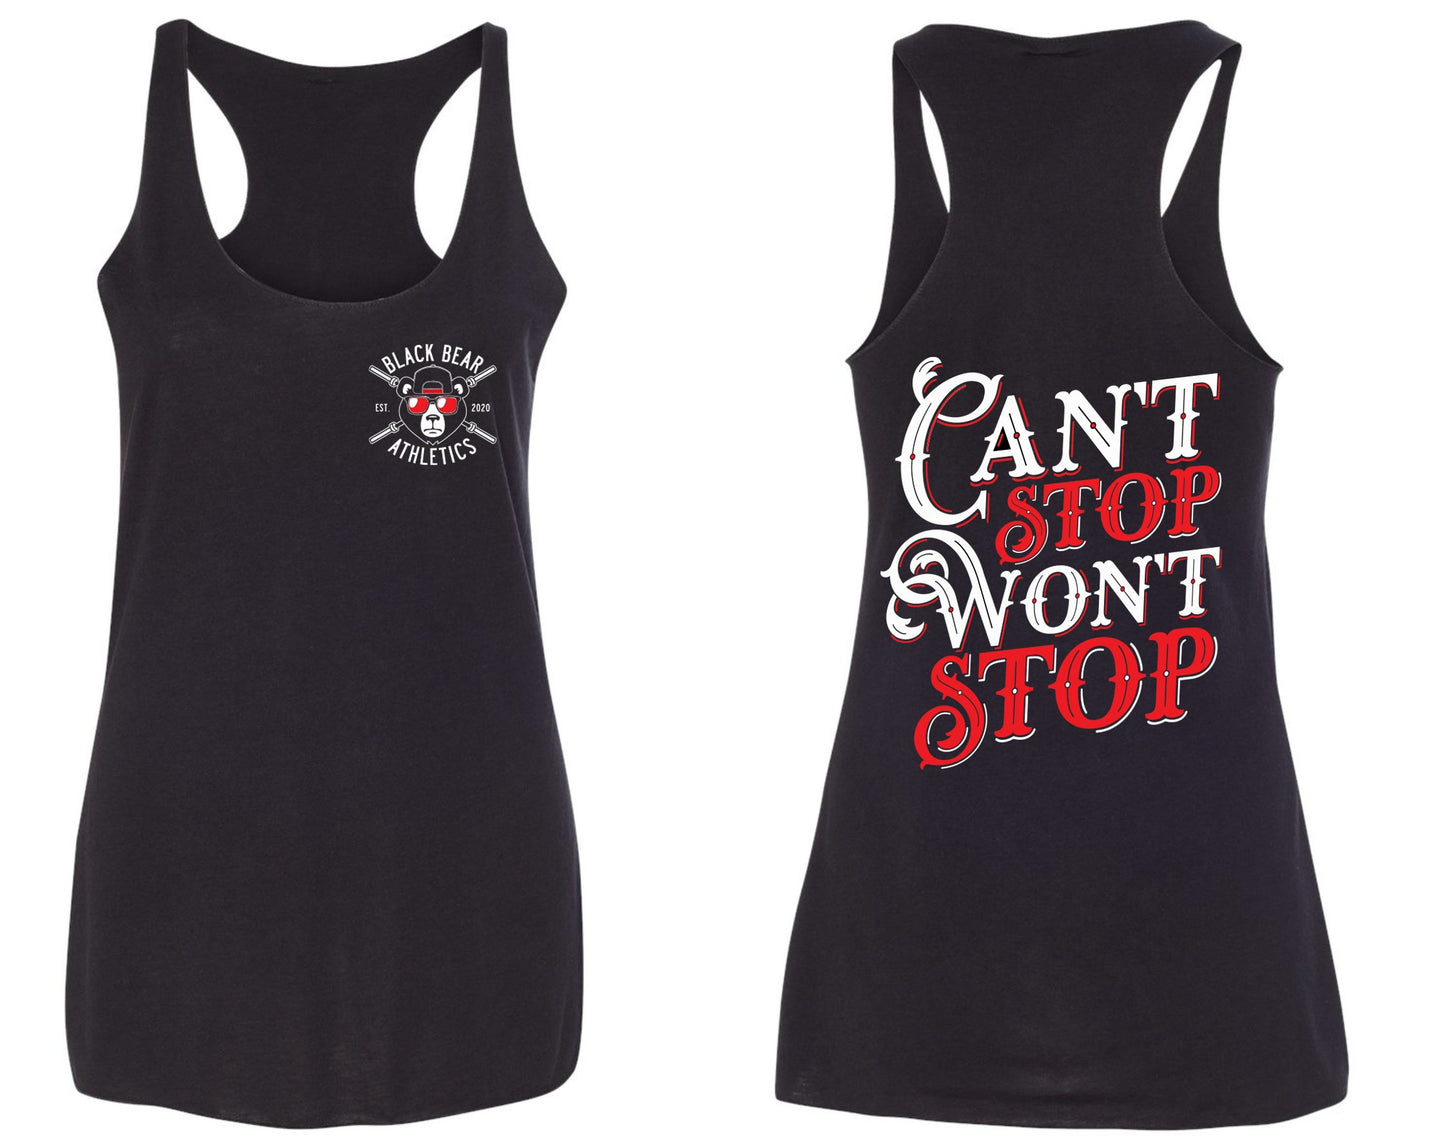 Can't Stop Won't Stop Black Bear Barbell Ladies Tank 8430